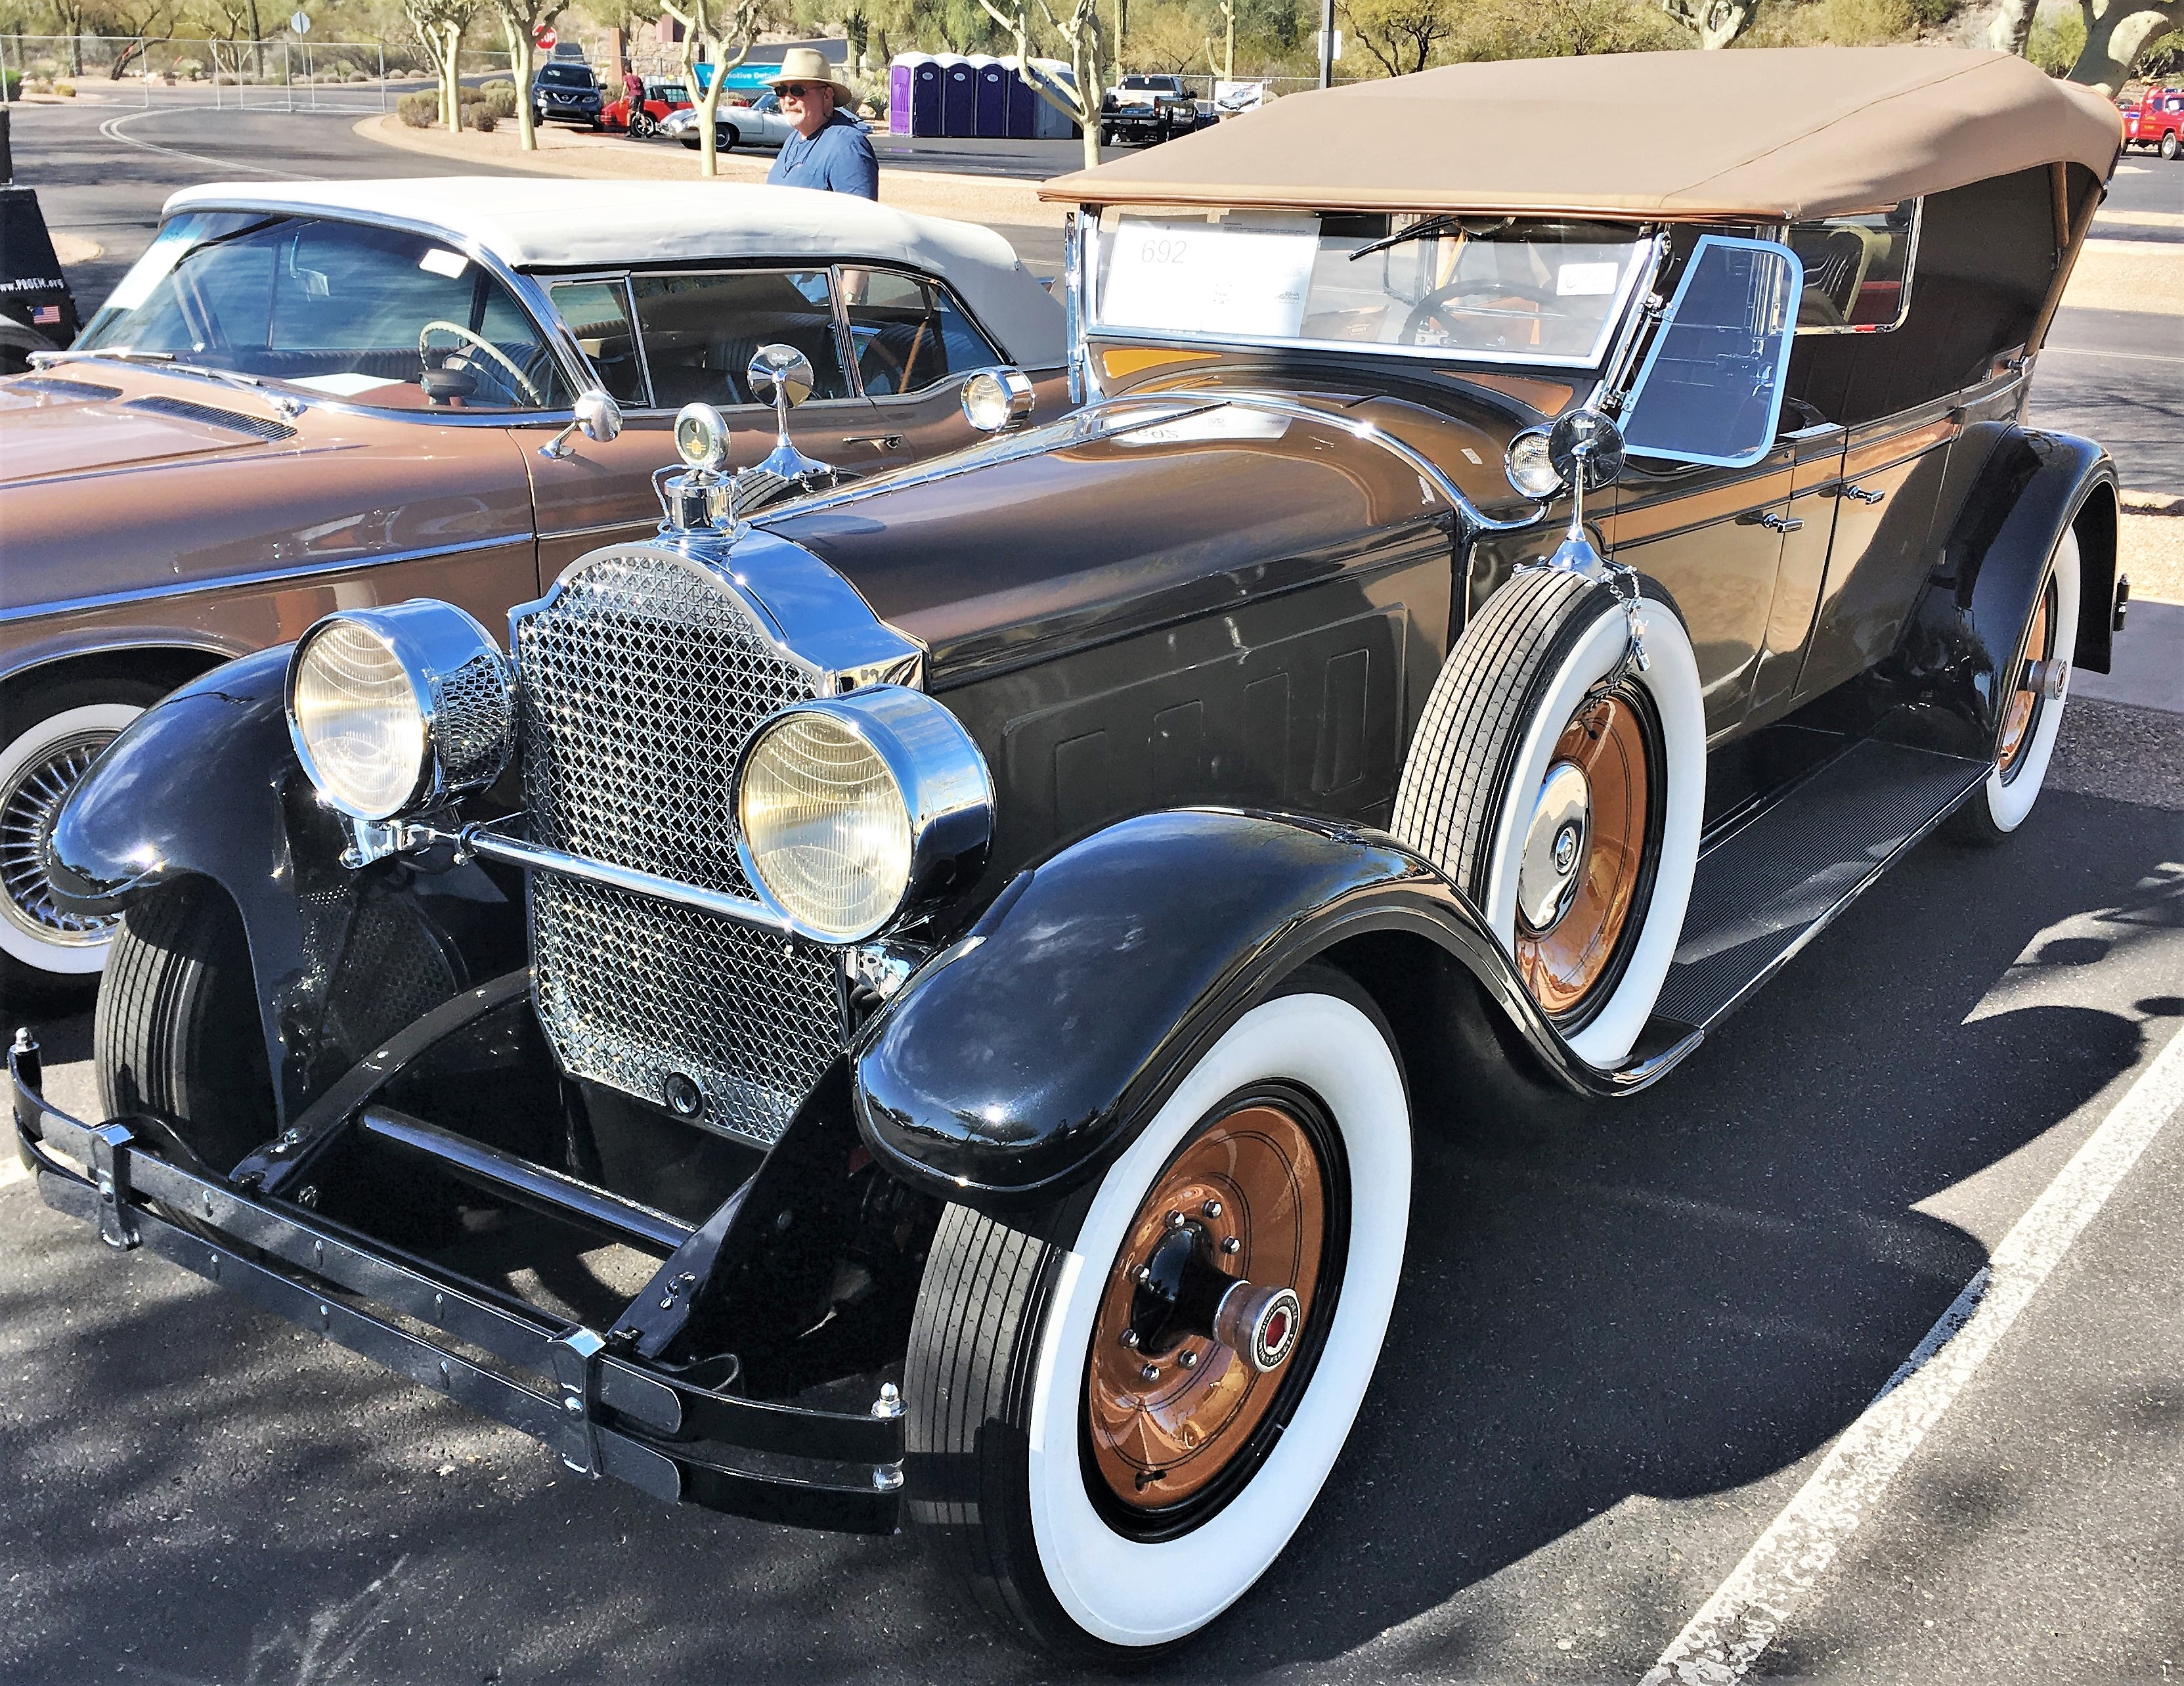 , Bill strikes gold at Silver Auctions Arizona, ClassicCars.com Journal